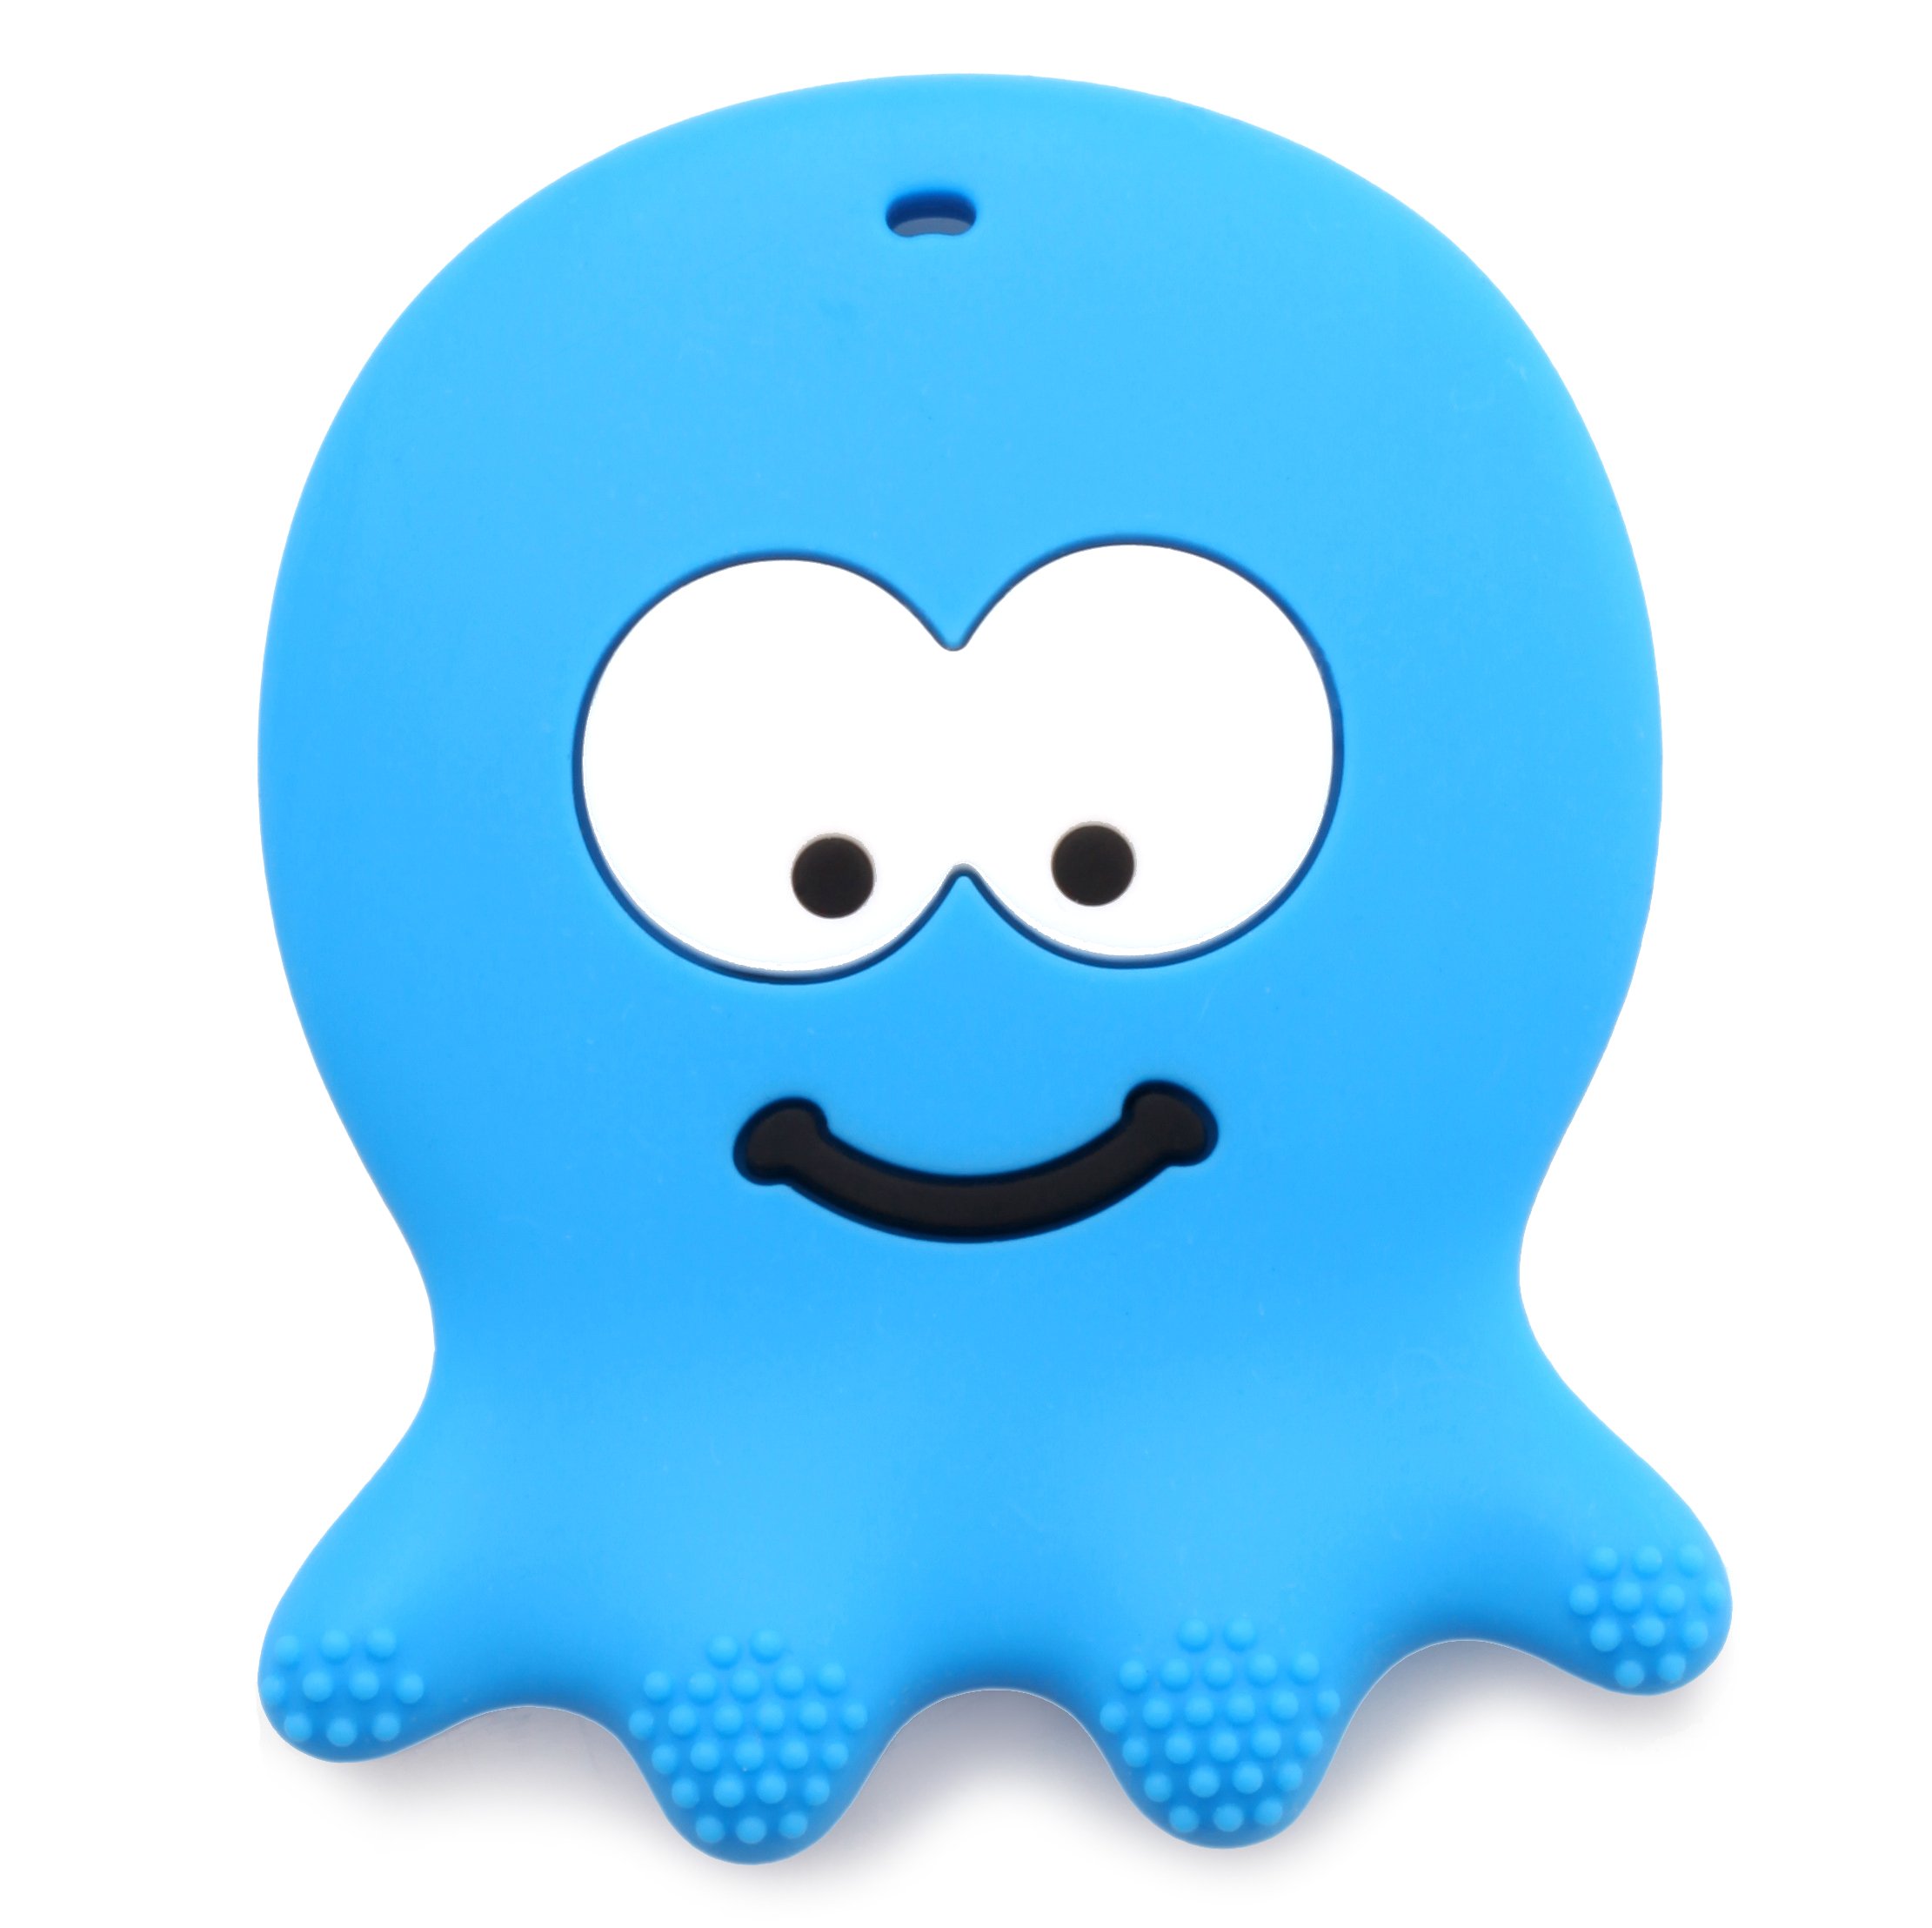 Book Cover Teething Toys for Boys - BPA Free Silicone - Easy to Hold, Soft, Bendable, Highly Effective Octopus Teether, Best for Freezer, Cool 3 6 12 Months 1 Year Old Blue